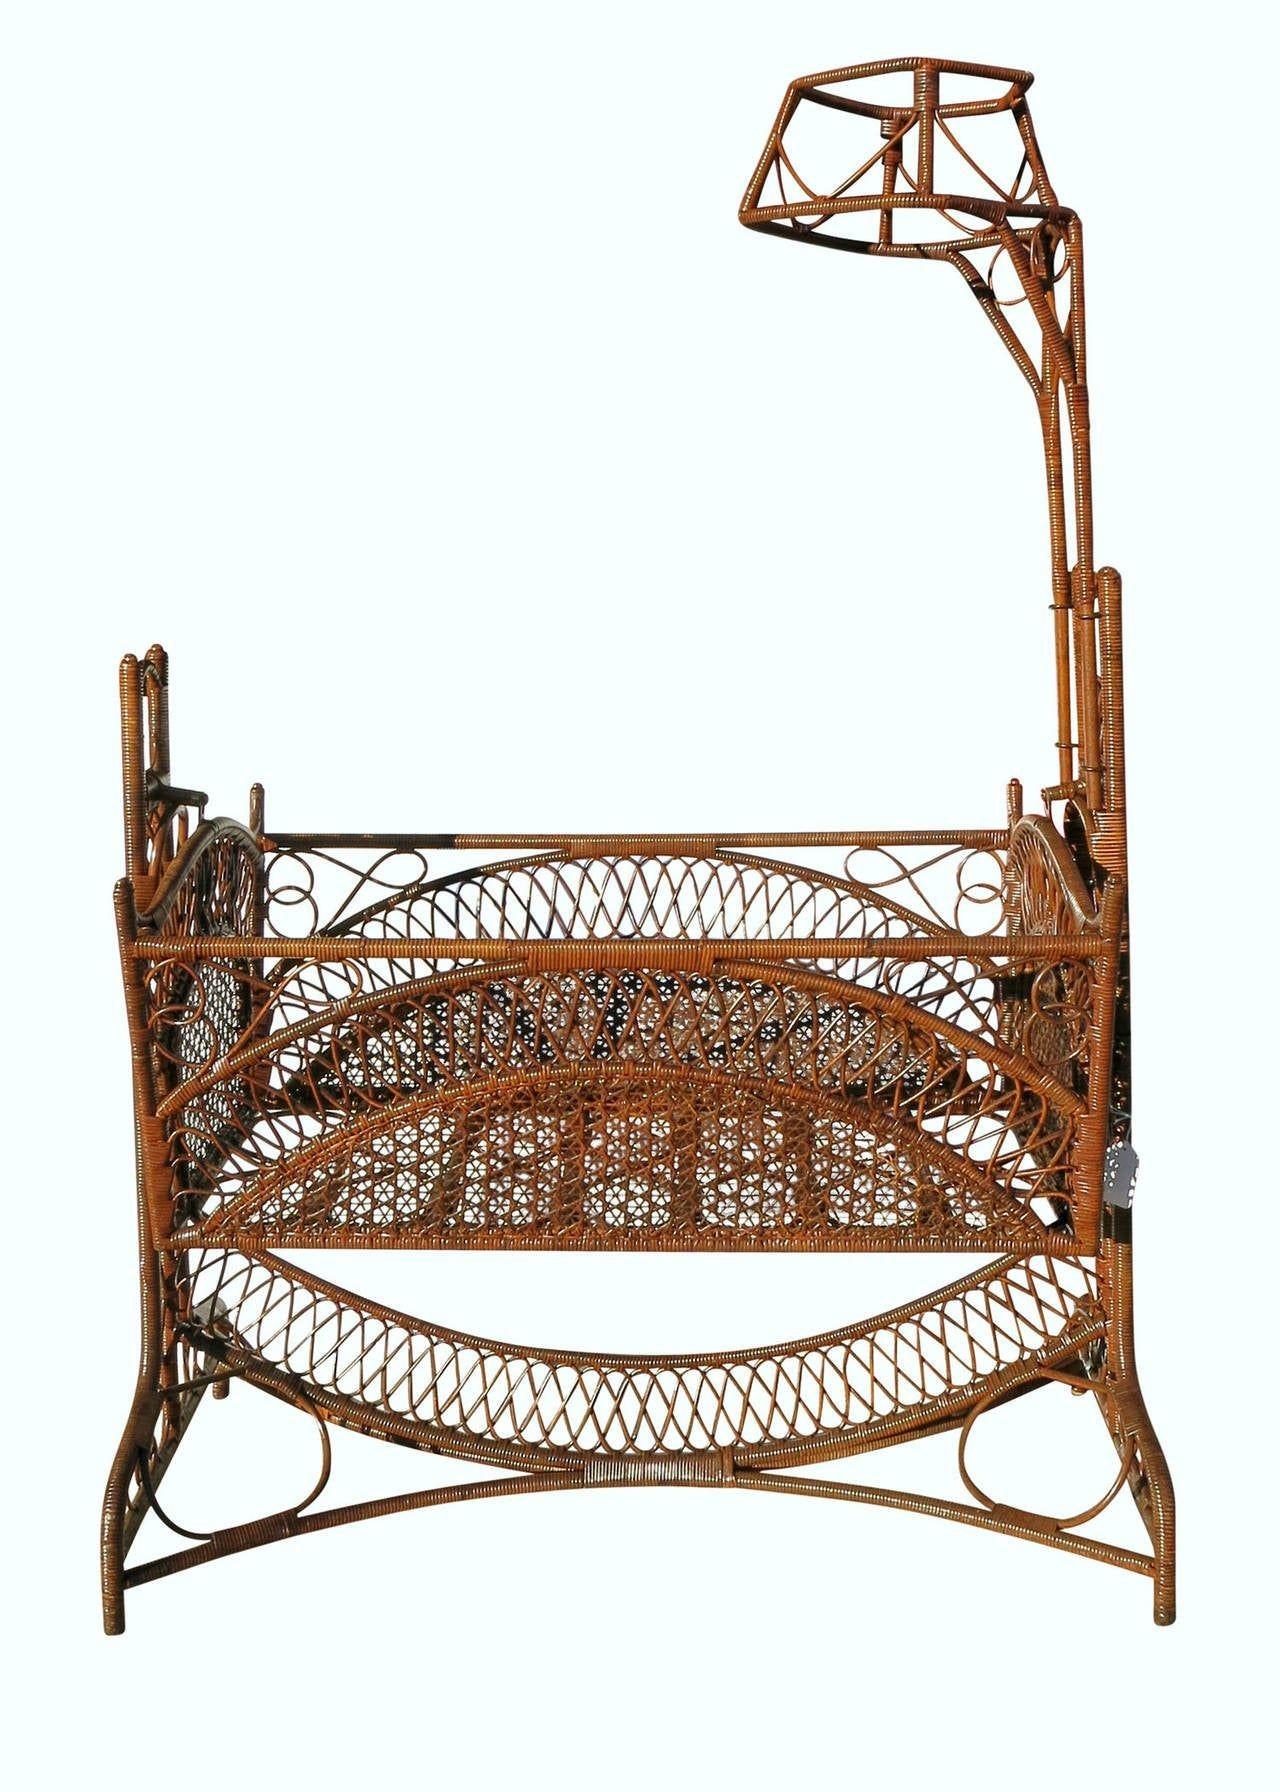 Edwardian Restored Victorian Southern Gothic Wicker & Bamboo Swinging Cradle